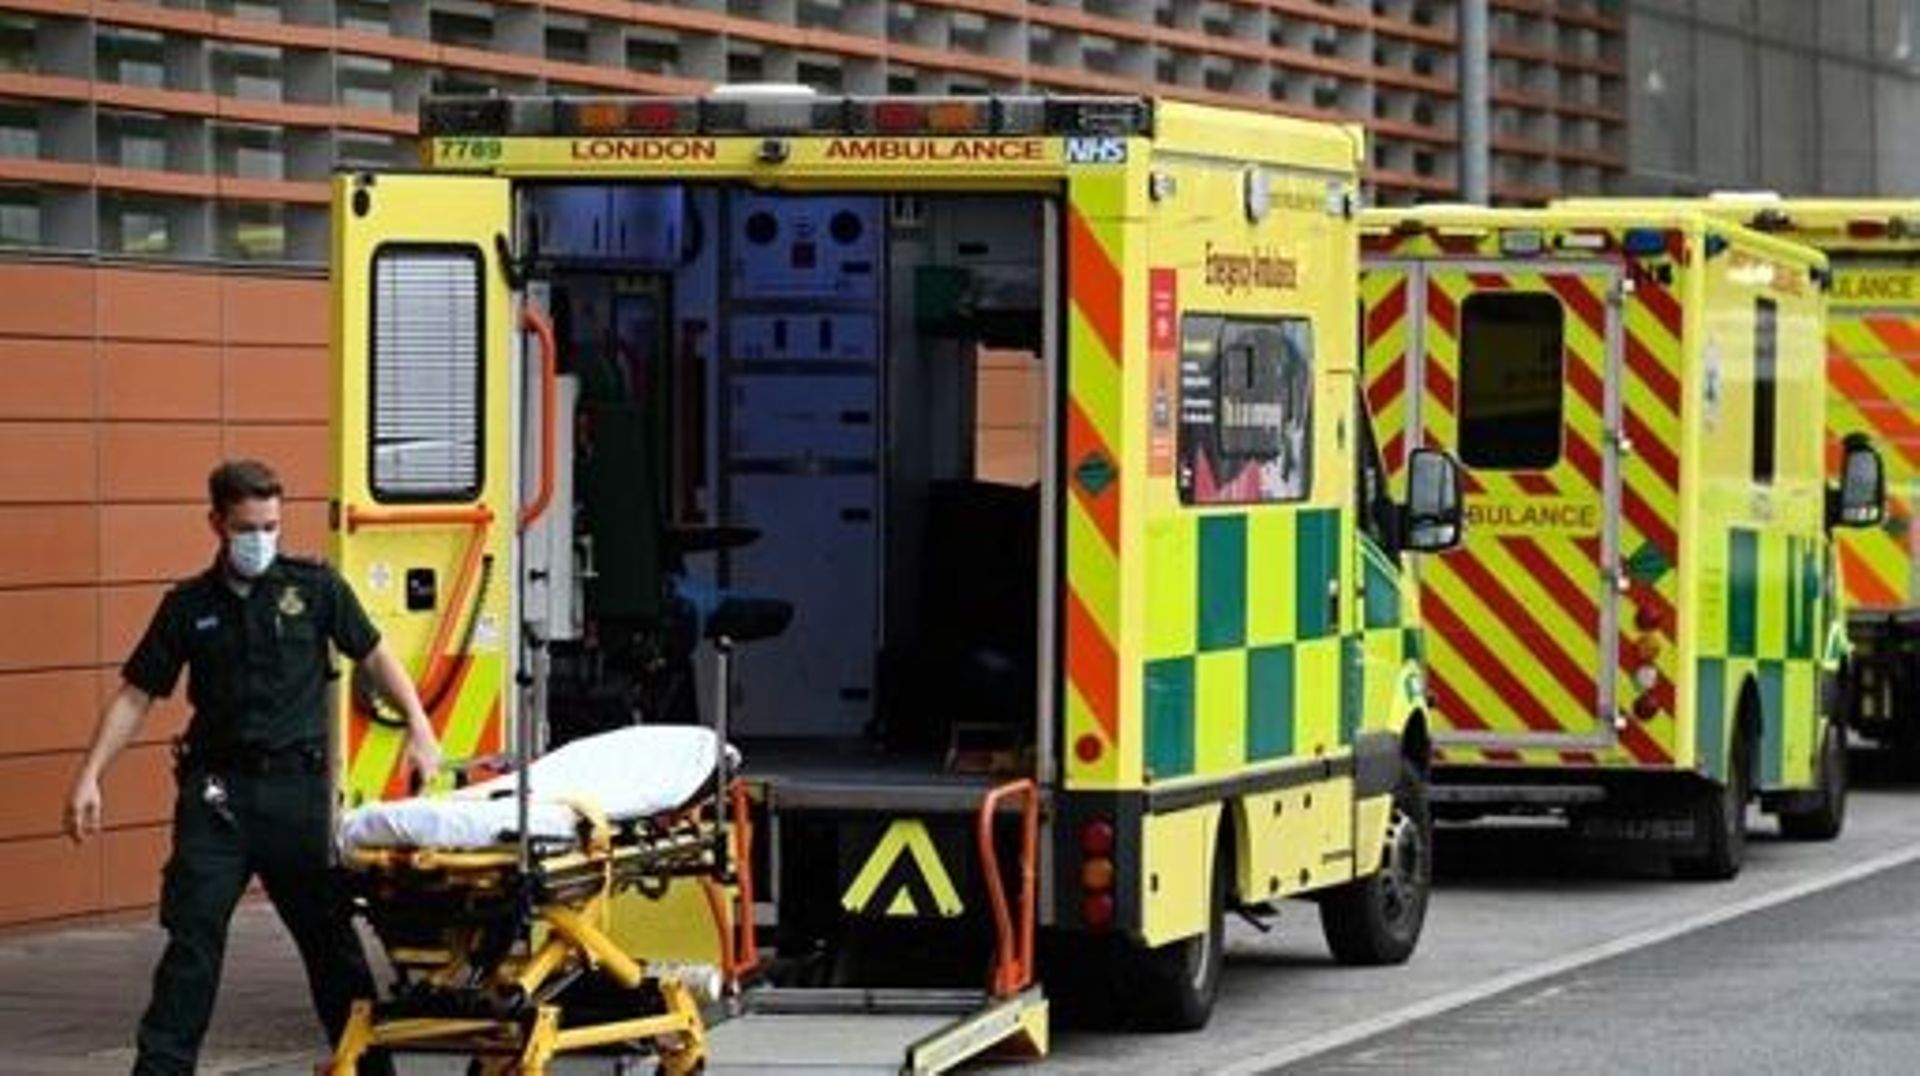 A paramedic wheels a stretcher off an ambulance outside the Royal London Hospital in east London on November 12, 2021.  All frontline workers in the National Health Service (NHS) in England will need to be fully vaccinated against Covid-19 from April 1 or